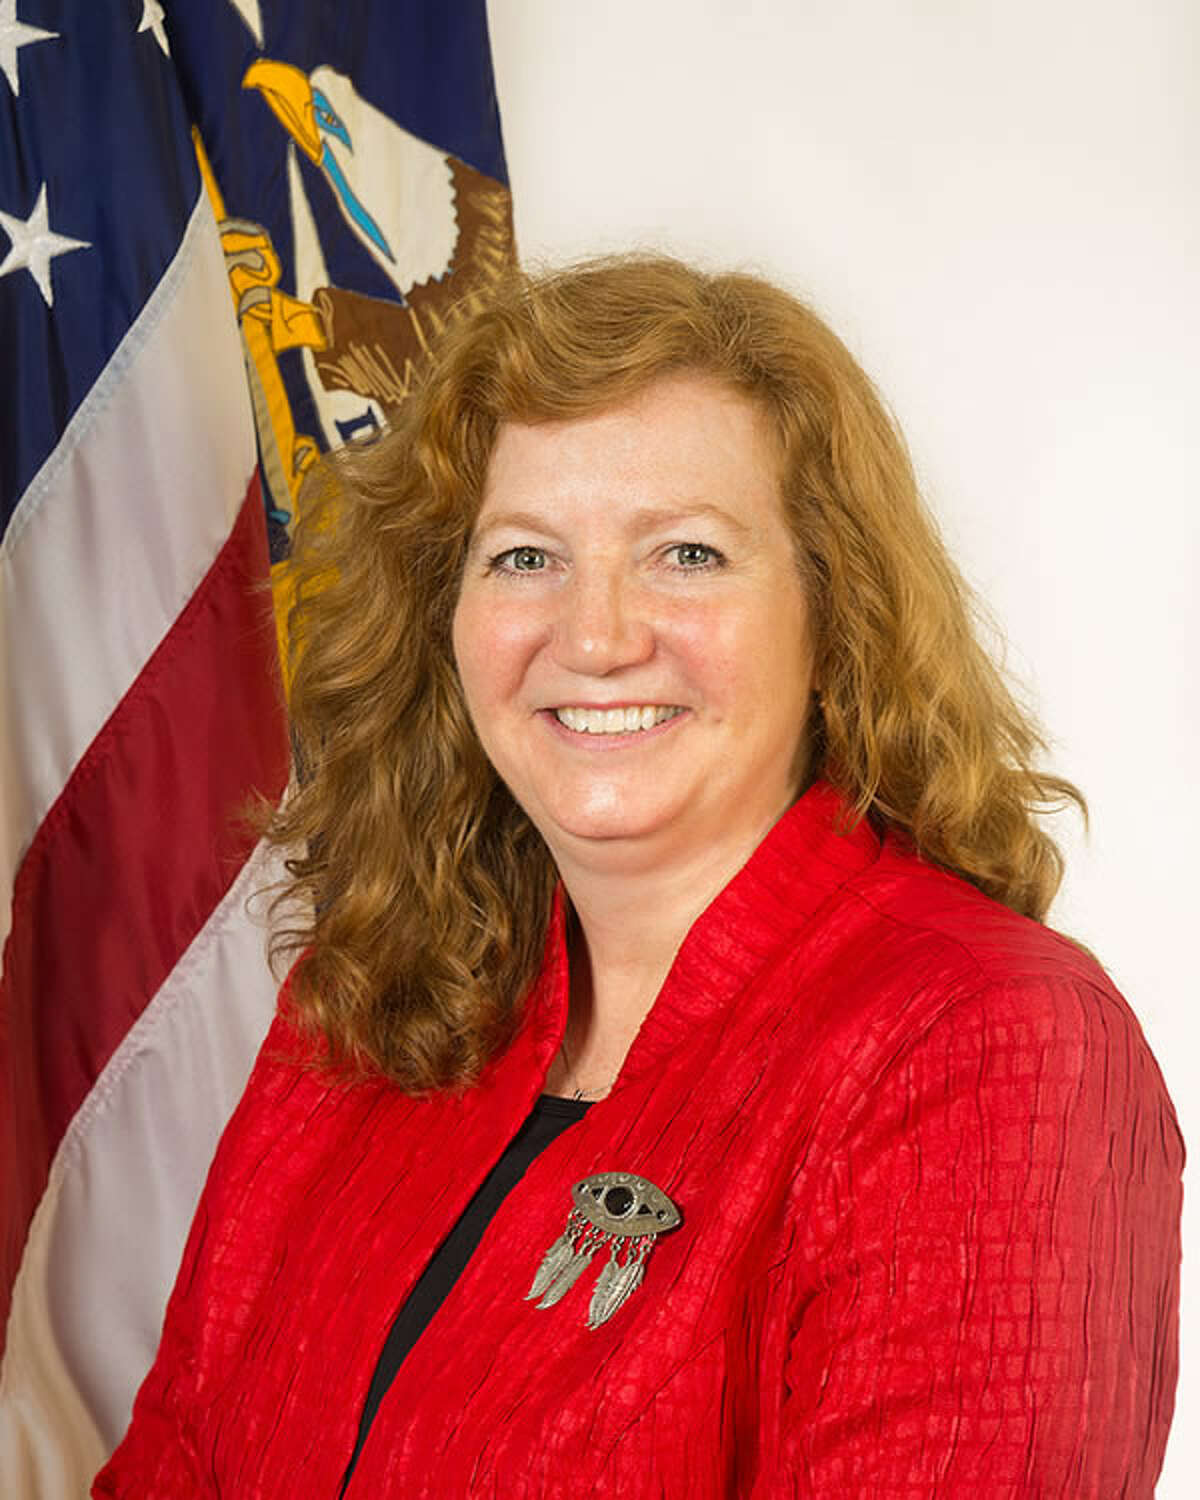 Laura Fortman is principal deputy administrator for U.S. Department of Labor's wage and hour division